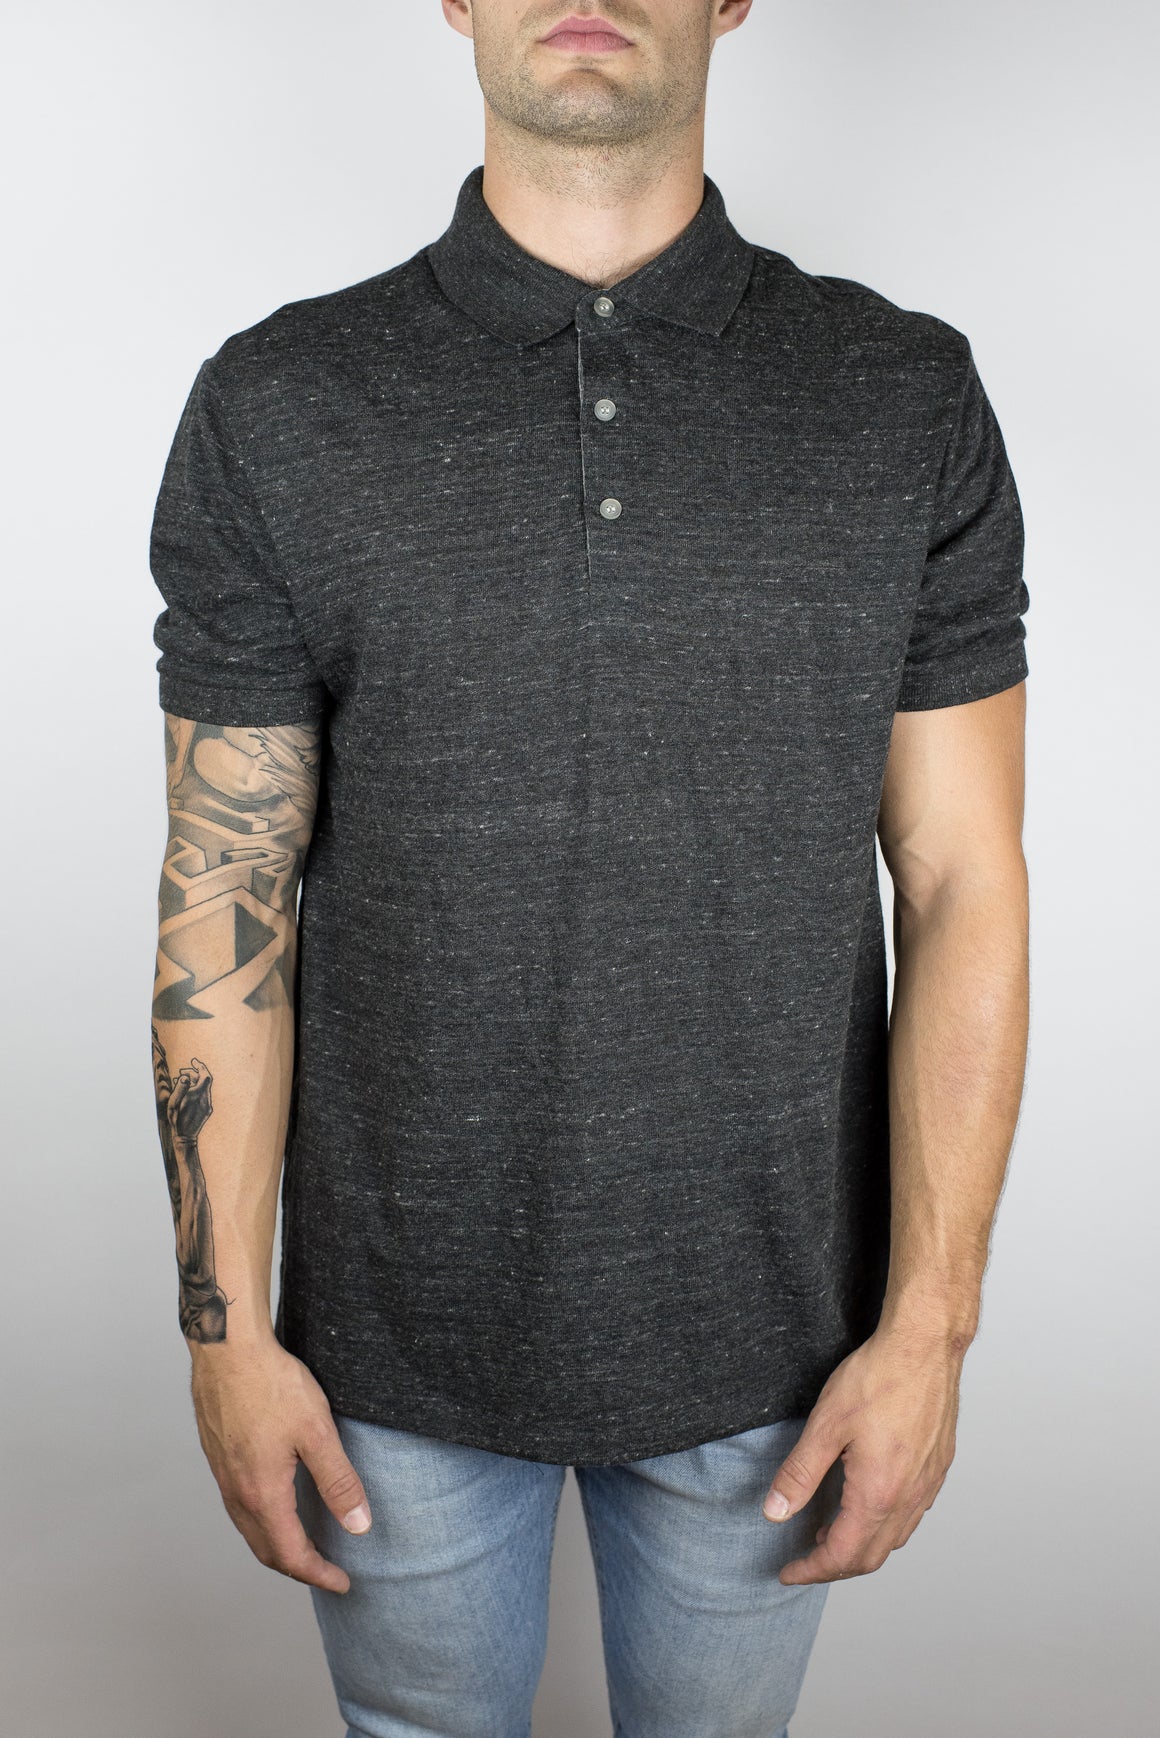 The Bonfire Polo in Heather Charcoal